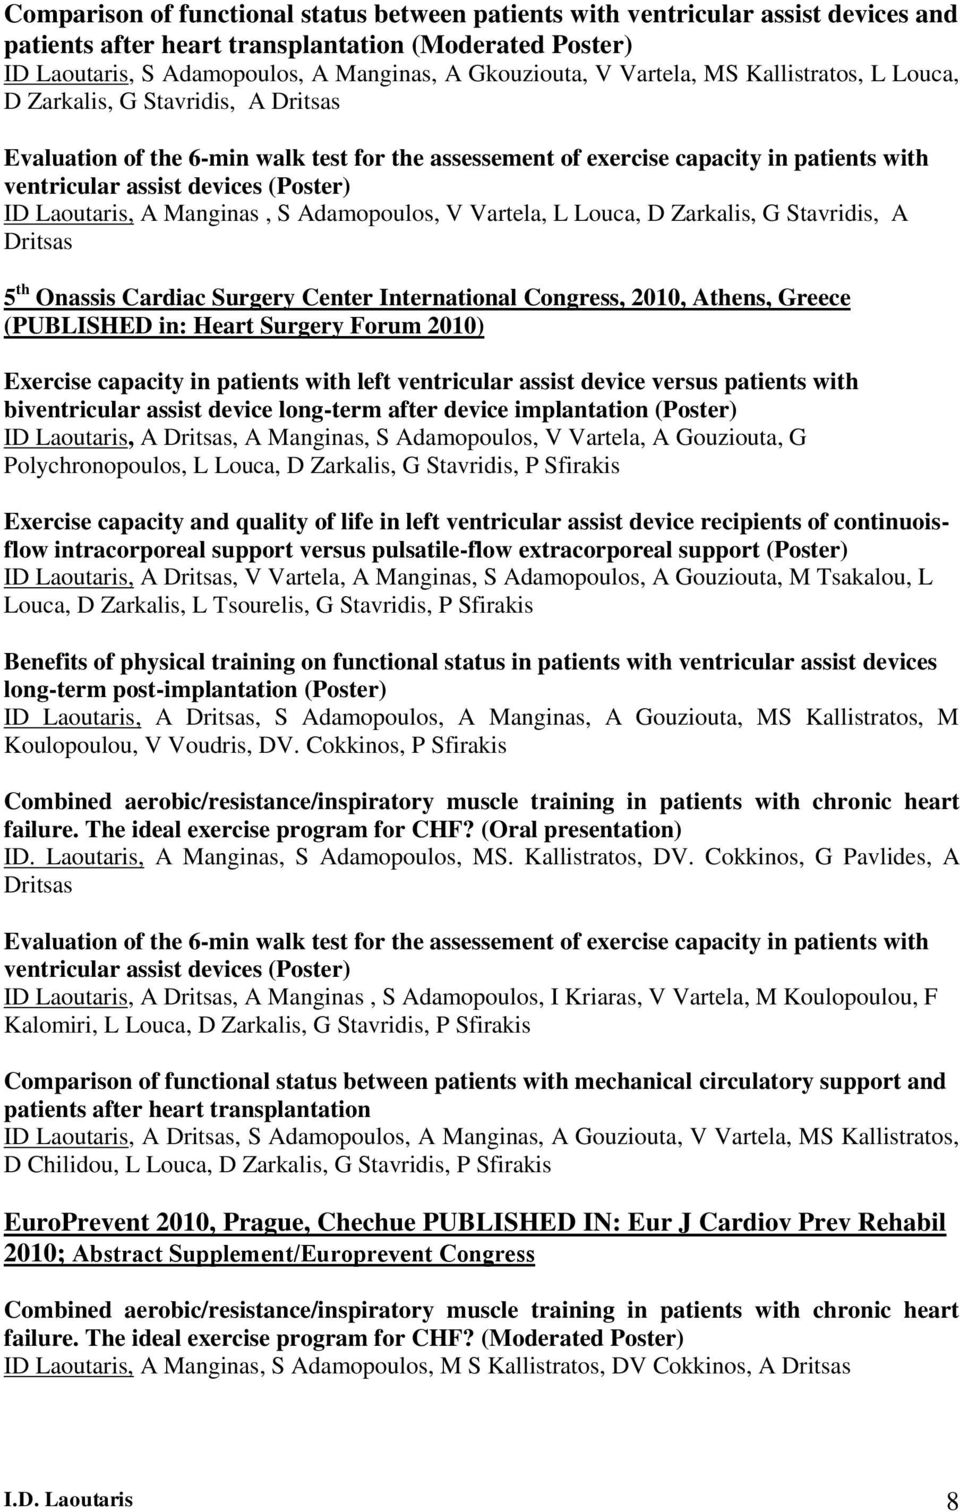 ID Laoutaris, A Manginas, S Adamopoulos, V Vartela, L Louca, D Zarkalis, G Stavridis, A Dritsas 5 th Onassis Cardiac Surgery Center International Congress, 2010, Athens, Greece (PUBLISHED in: Heart